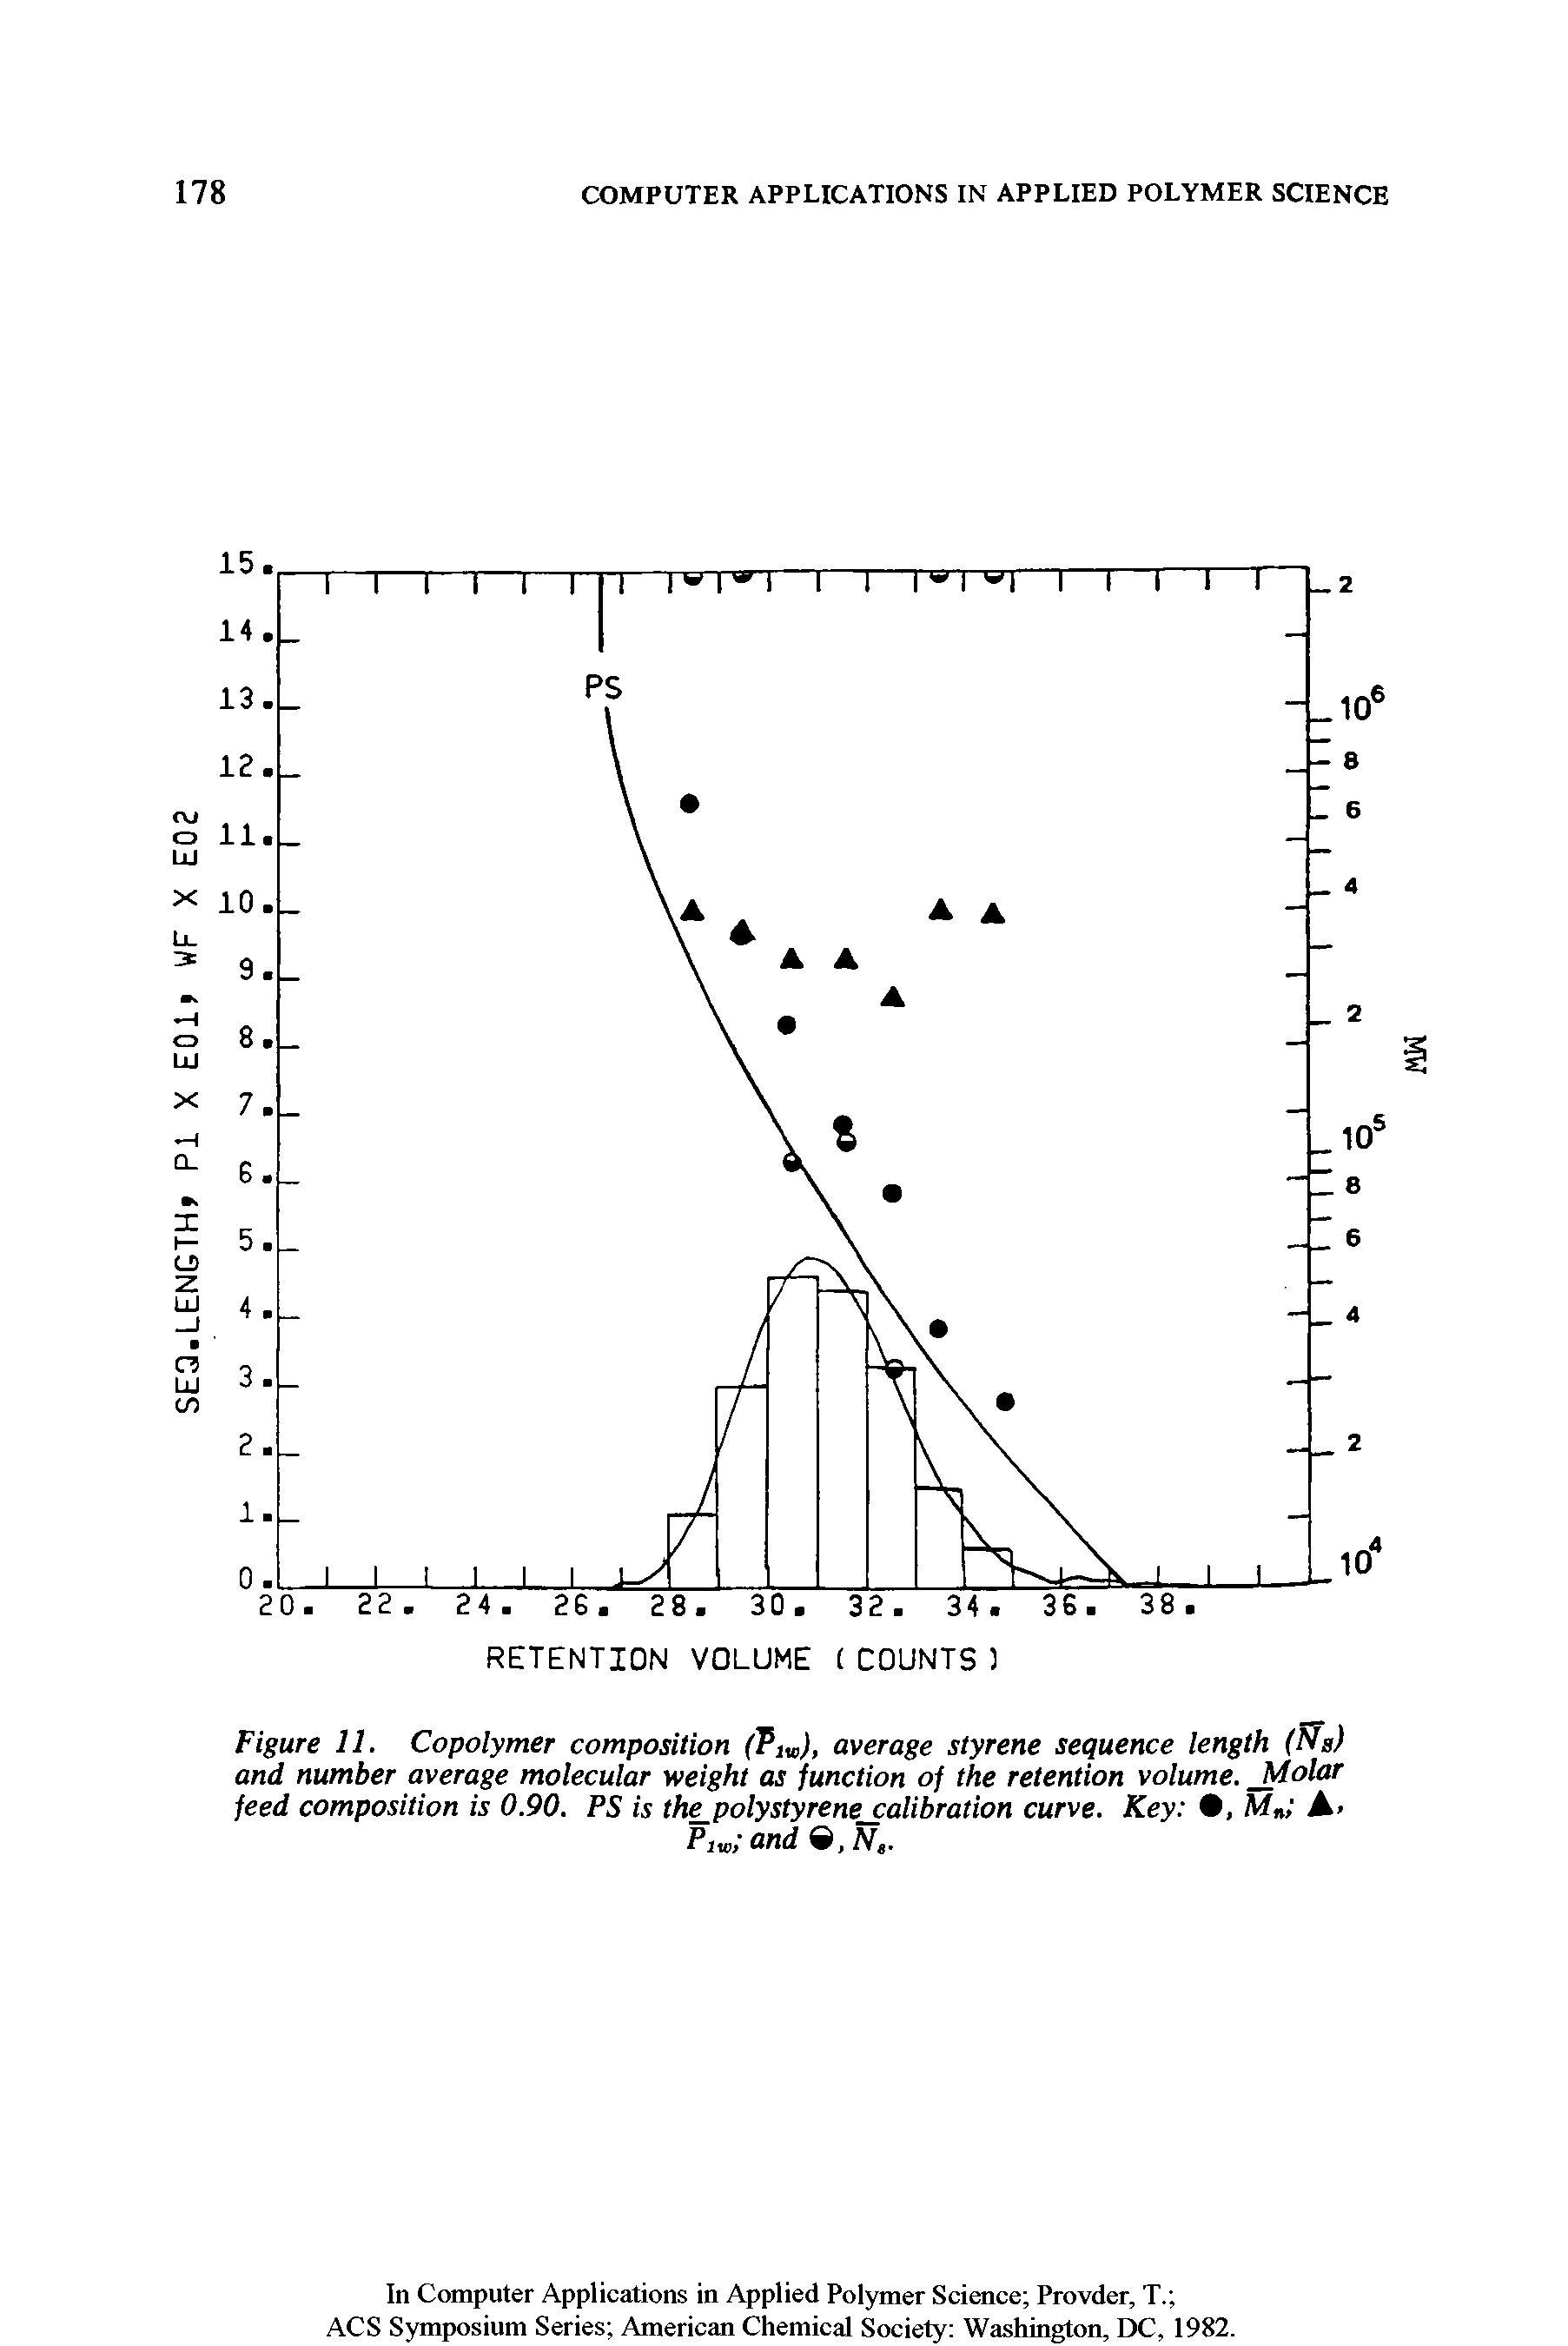 Figure 11. Copolymer composition (Plv), average styrene sequence length (Ns) and number average molecular weight as function of the retention volume. Molar feed composition is 0.90. PS is the polystyrene calibration curve. Key , Mn A>...